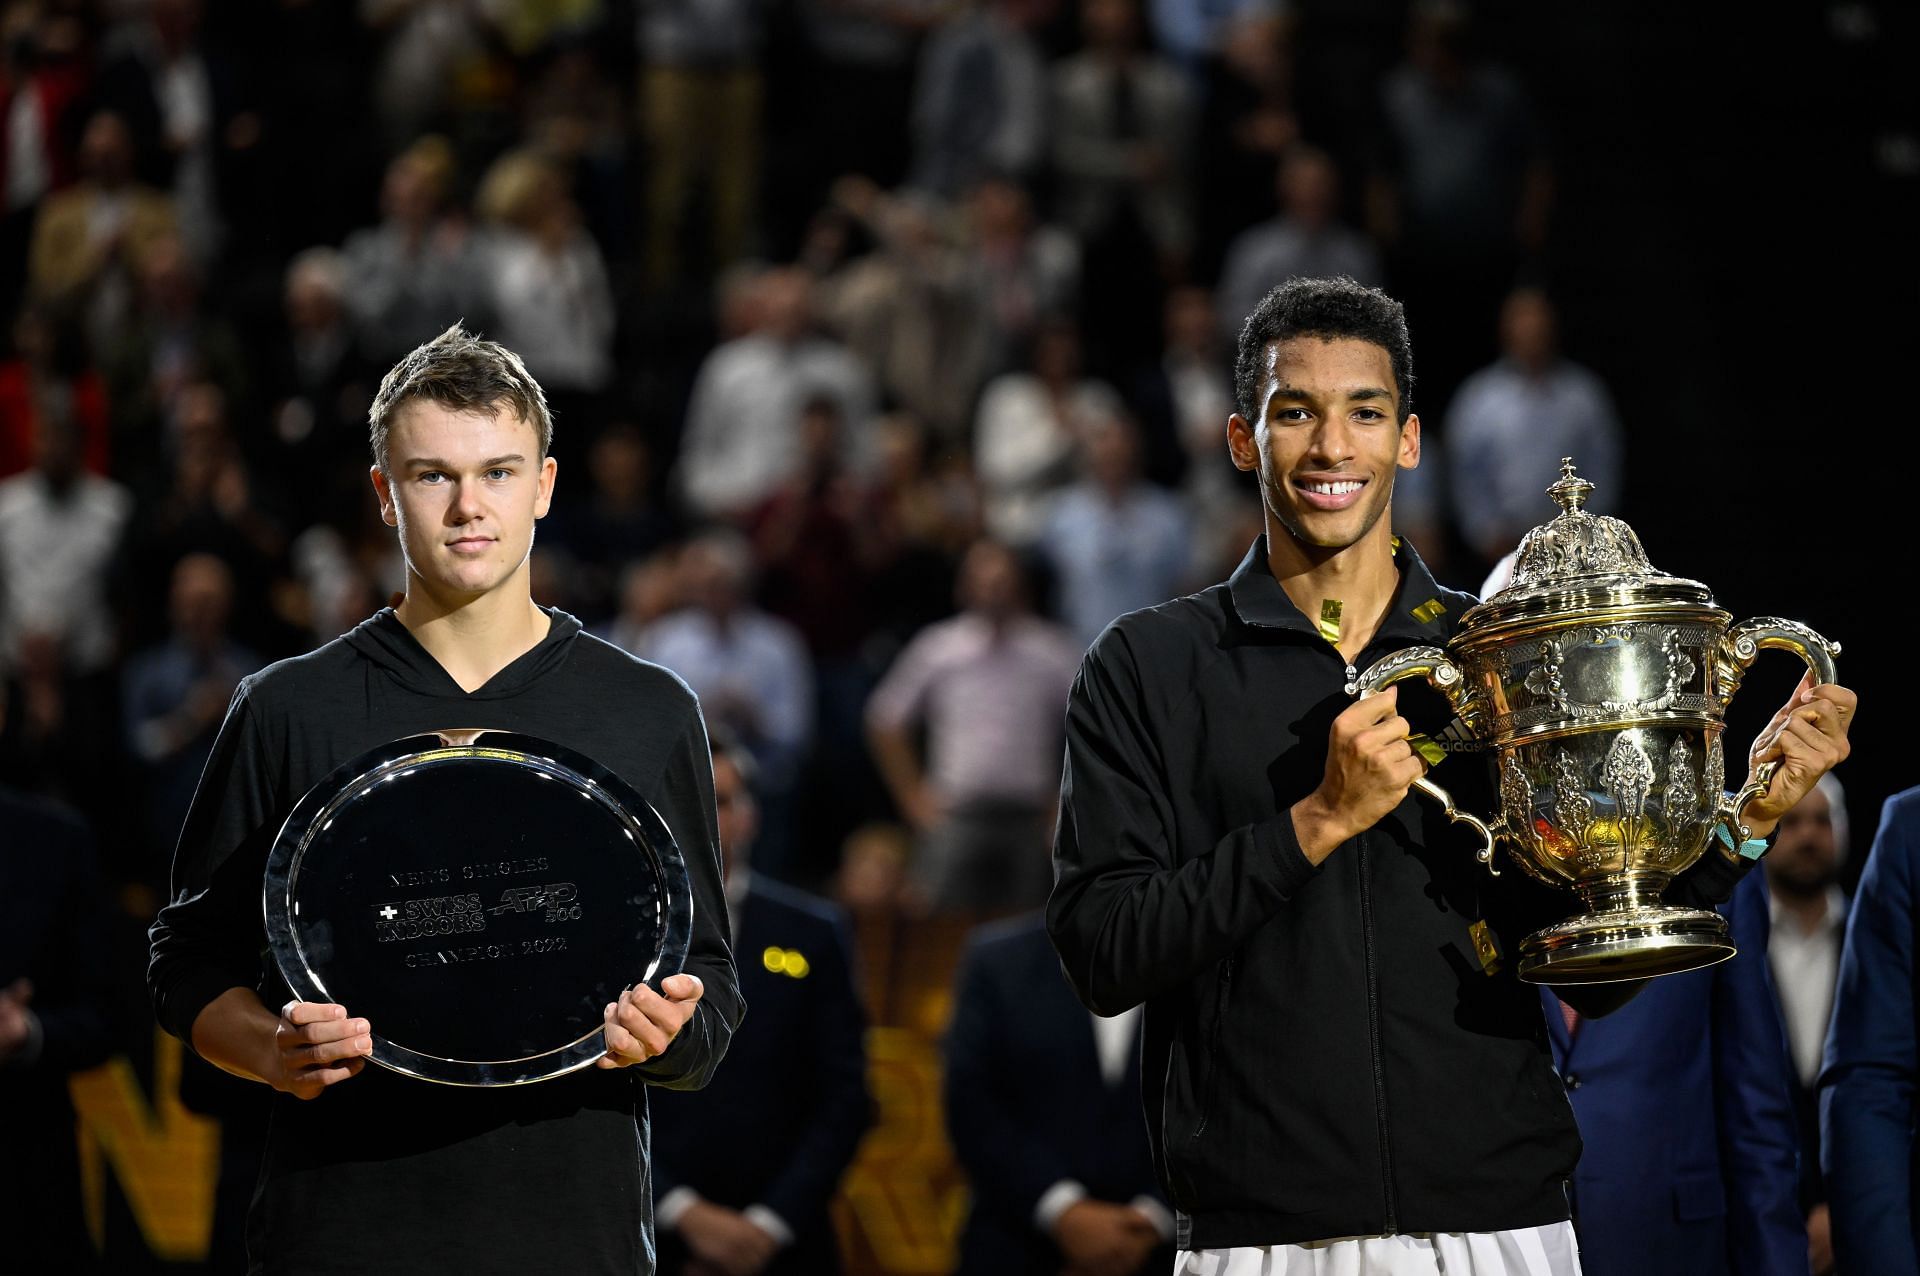 Felix Auger-Aliassime vs Holger Rune Where to watch, TV schedule, live streaming details and more 2022 Paris Masters